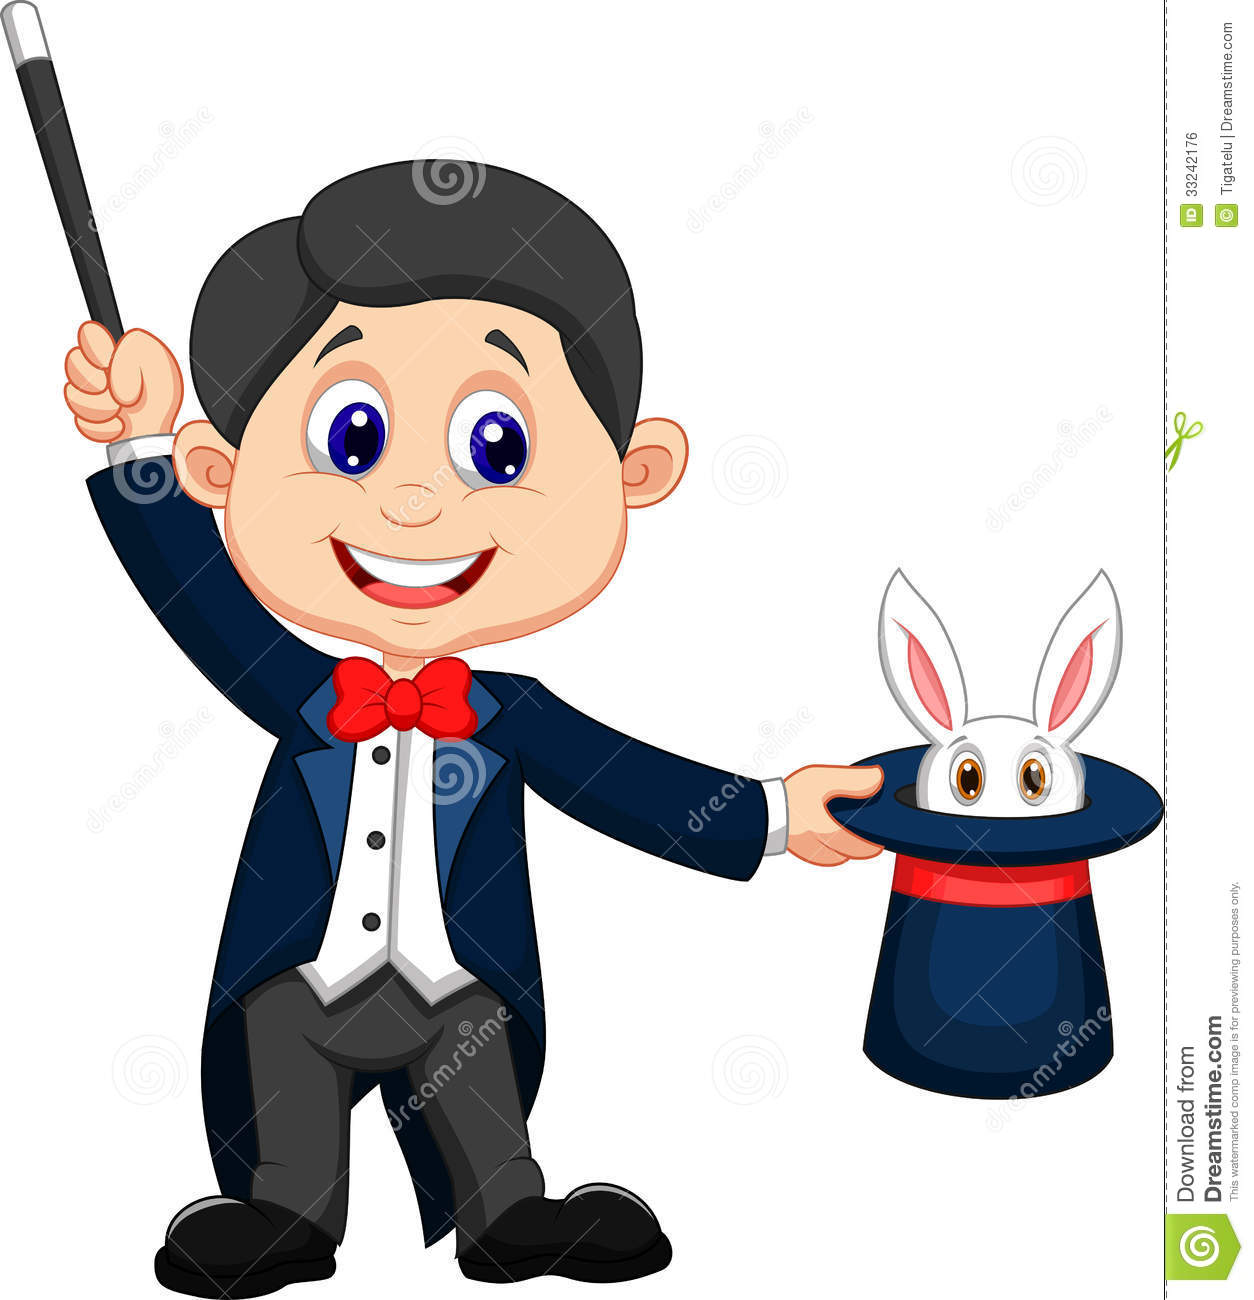 Magician Cartoon Pulling Out A Rabbit From His Top Hat Royalty Free